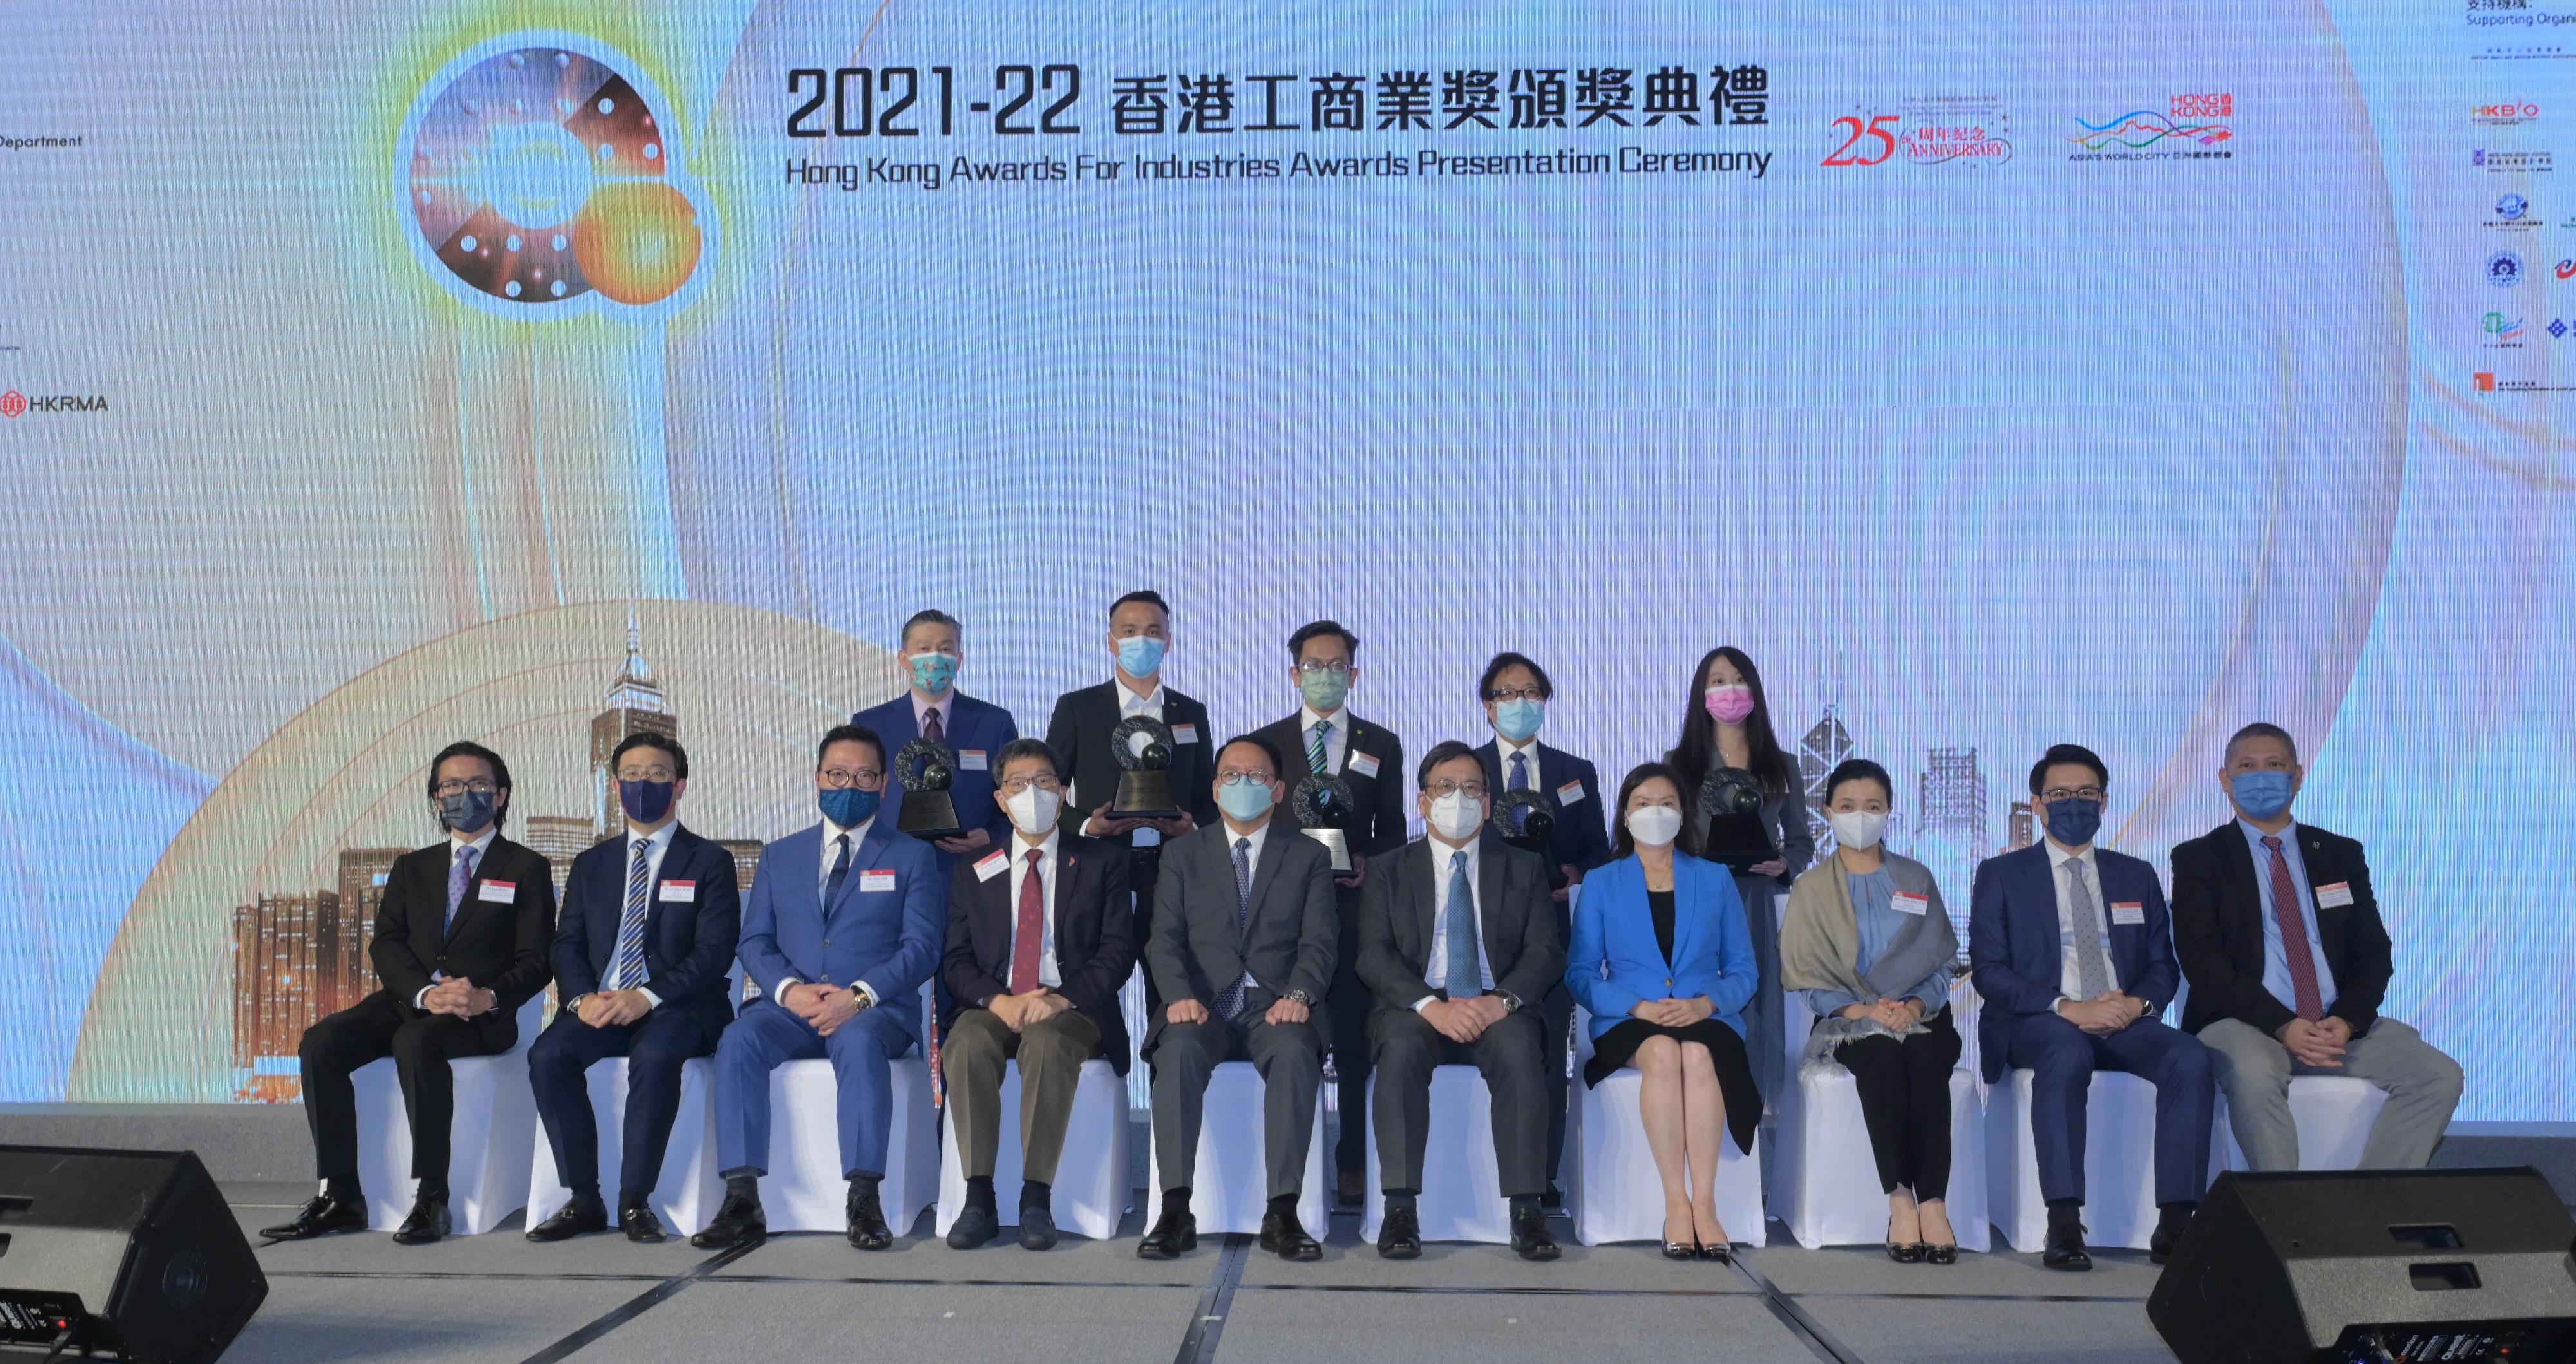 The Chief Secretary for Administration, Mr Chan Kwok-ki, attended the 2021-22 Hong Kong Awards for Industries Awards Presentation Ceremony today (November 28). Photo shows (first row, from left) the Chairman of the Design Council of Hong Kong, Mr Ken Fung; the President of the Hong Kong Young Industrialists Council, Mr Geoffrey Kao; the President of the Chinese Manufacturers’ Association of Hong Kong, Dr Allen Shi; the Chairman of the Final Judging Panels of the 2021-22 Hong Kong Awards for Industries, Professor Way Kuo; Mr Chan; the Secretary for Commerce and Economic Development, Mr Algernon Yau; the Director-General of Trade and Industry, Ms Maggie Wong; the Chairman of the Hong Kong Retail Management Association, Mrs Annie Tse; the Chairman of the Industry & Technology Committee of the Hong Kong General Chamber of Commerce, Mr Victor Lam; and the Head of Business Development of the Hong Kong Science and Technology Parks Corporation, Mr Oscar Wong with the representatives of award winners. 